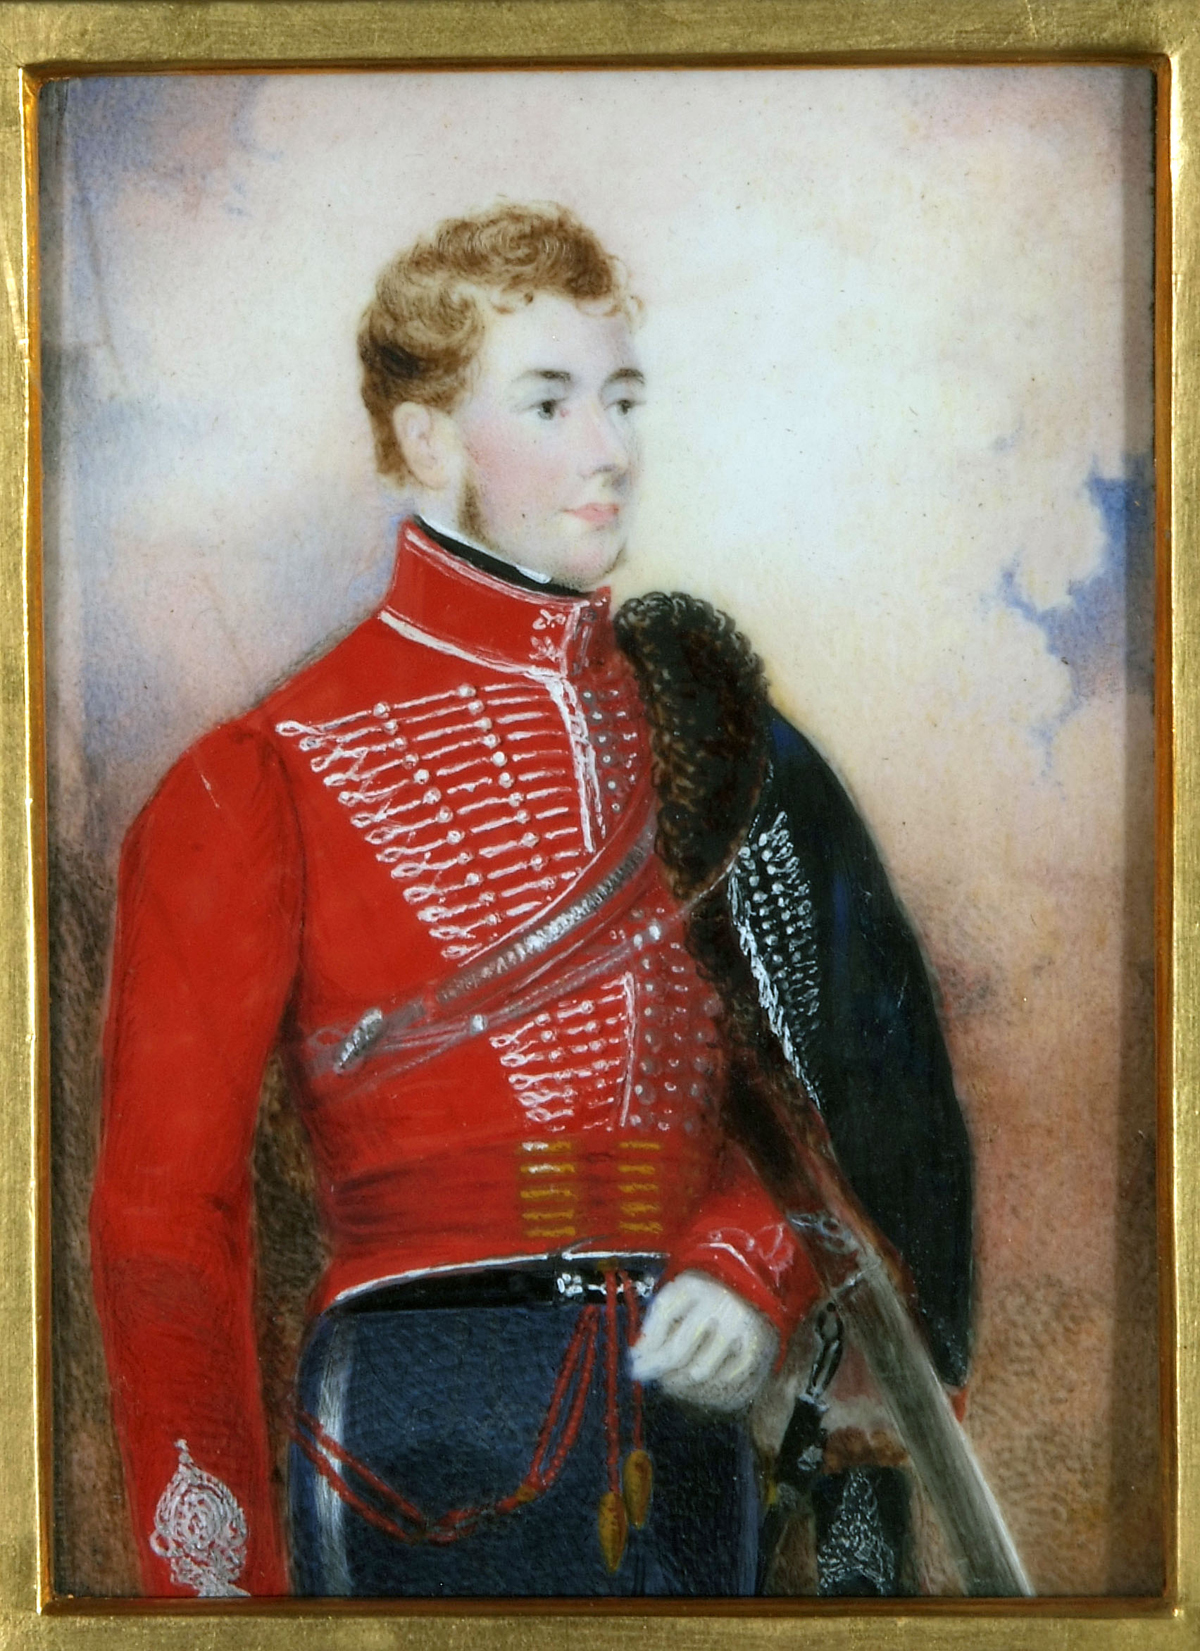 ATTRIBUTED TO KENNETH MACLEAY, (1802-1878, BRITISH) Portrait of an Officer wearing red Tunic circa